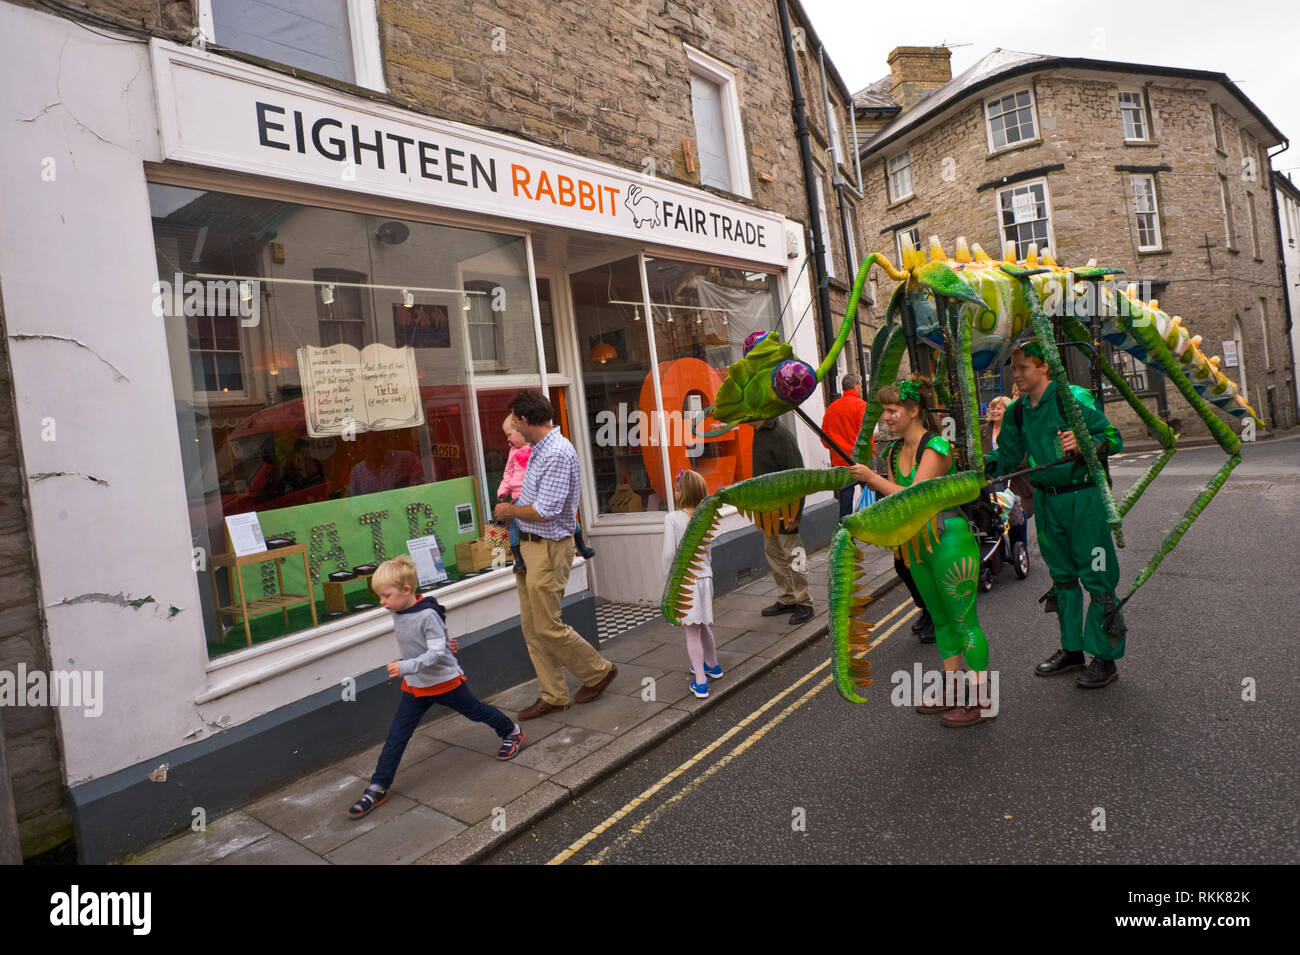 Large green praying mantis an automaton part of an art ptoject being paraded around the town centre of Hay on Wye Powys Wales UK Stock Photo